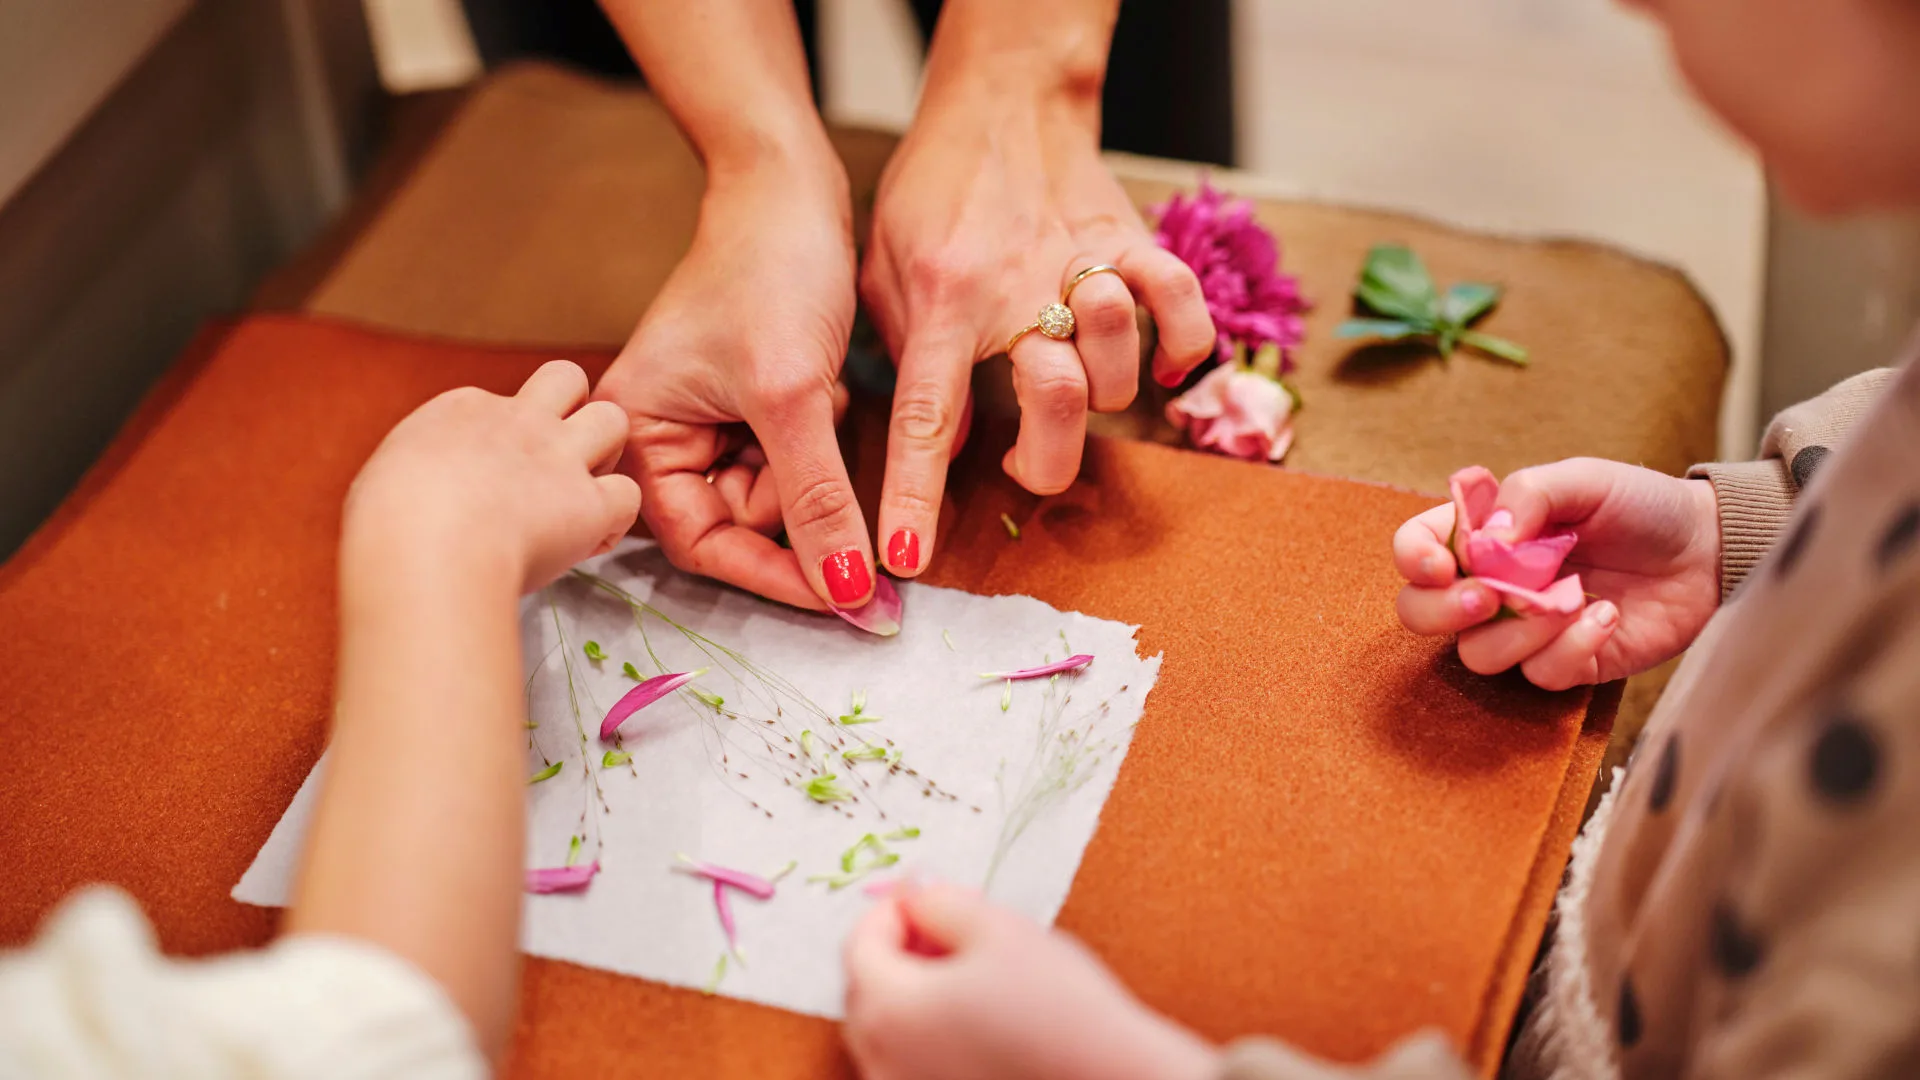 Adult and children laying flowers on handmade paper